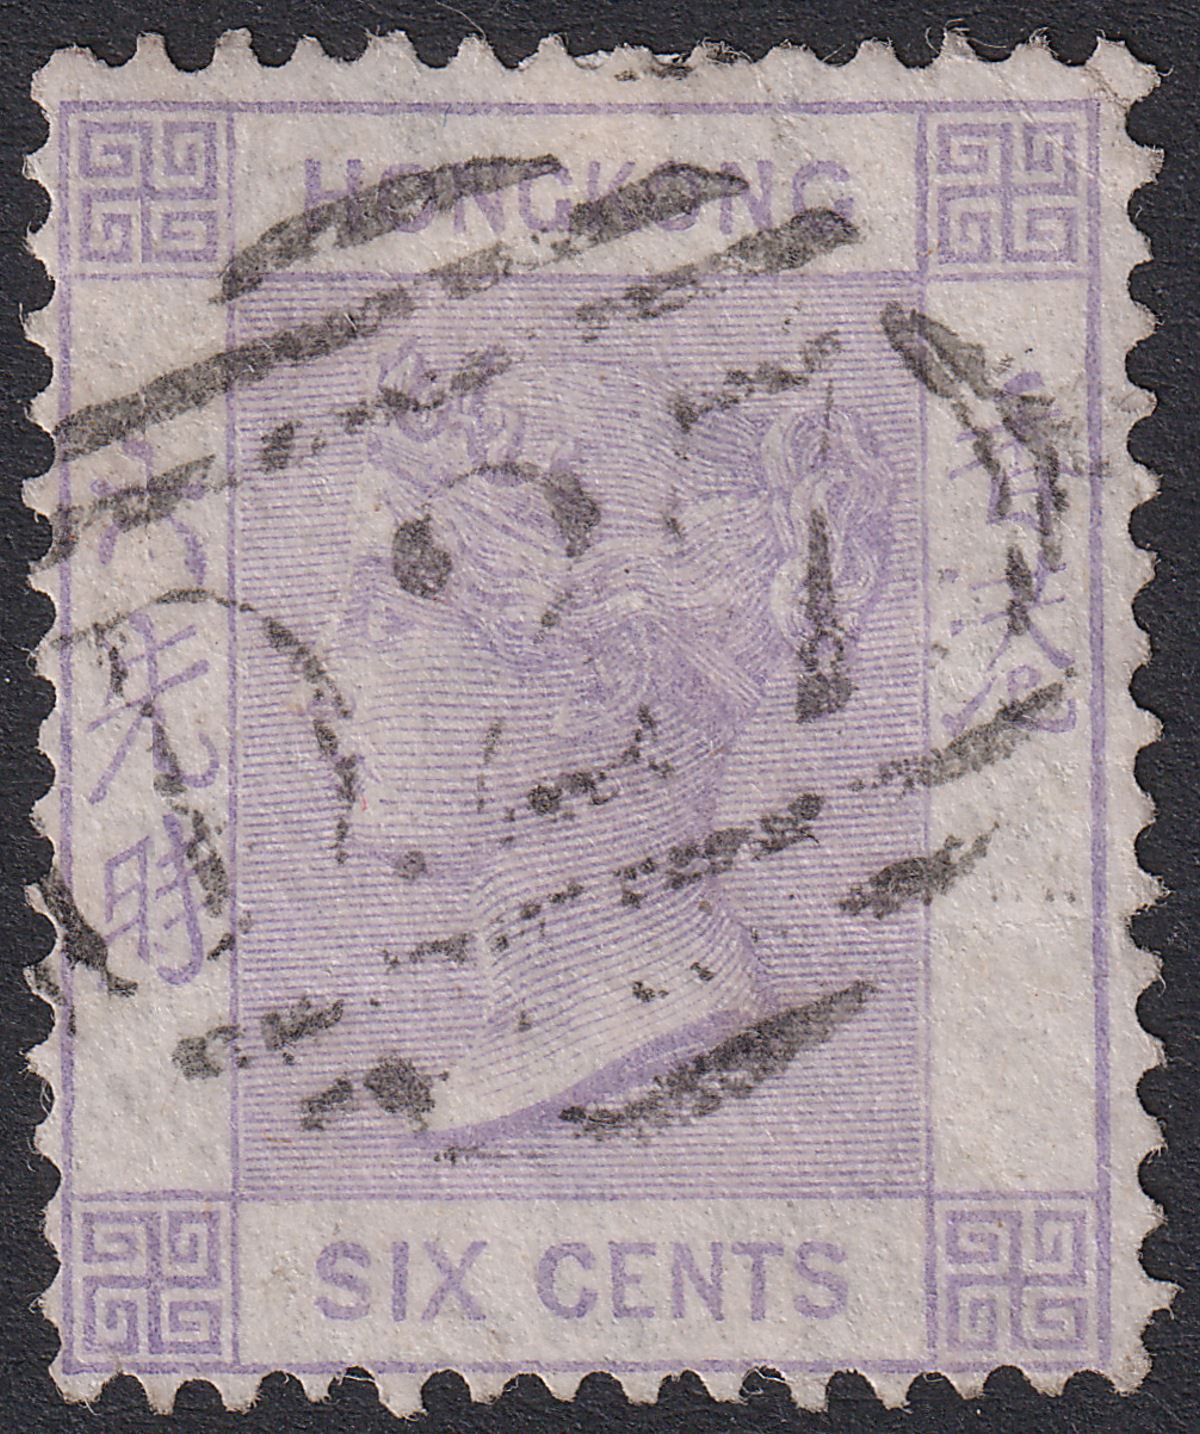 Hong Kong 1863 QV 6c Lilac Used with D27 Postmark Amoy SG Z10 cat £75